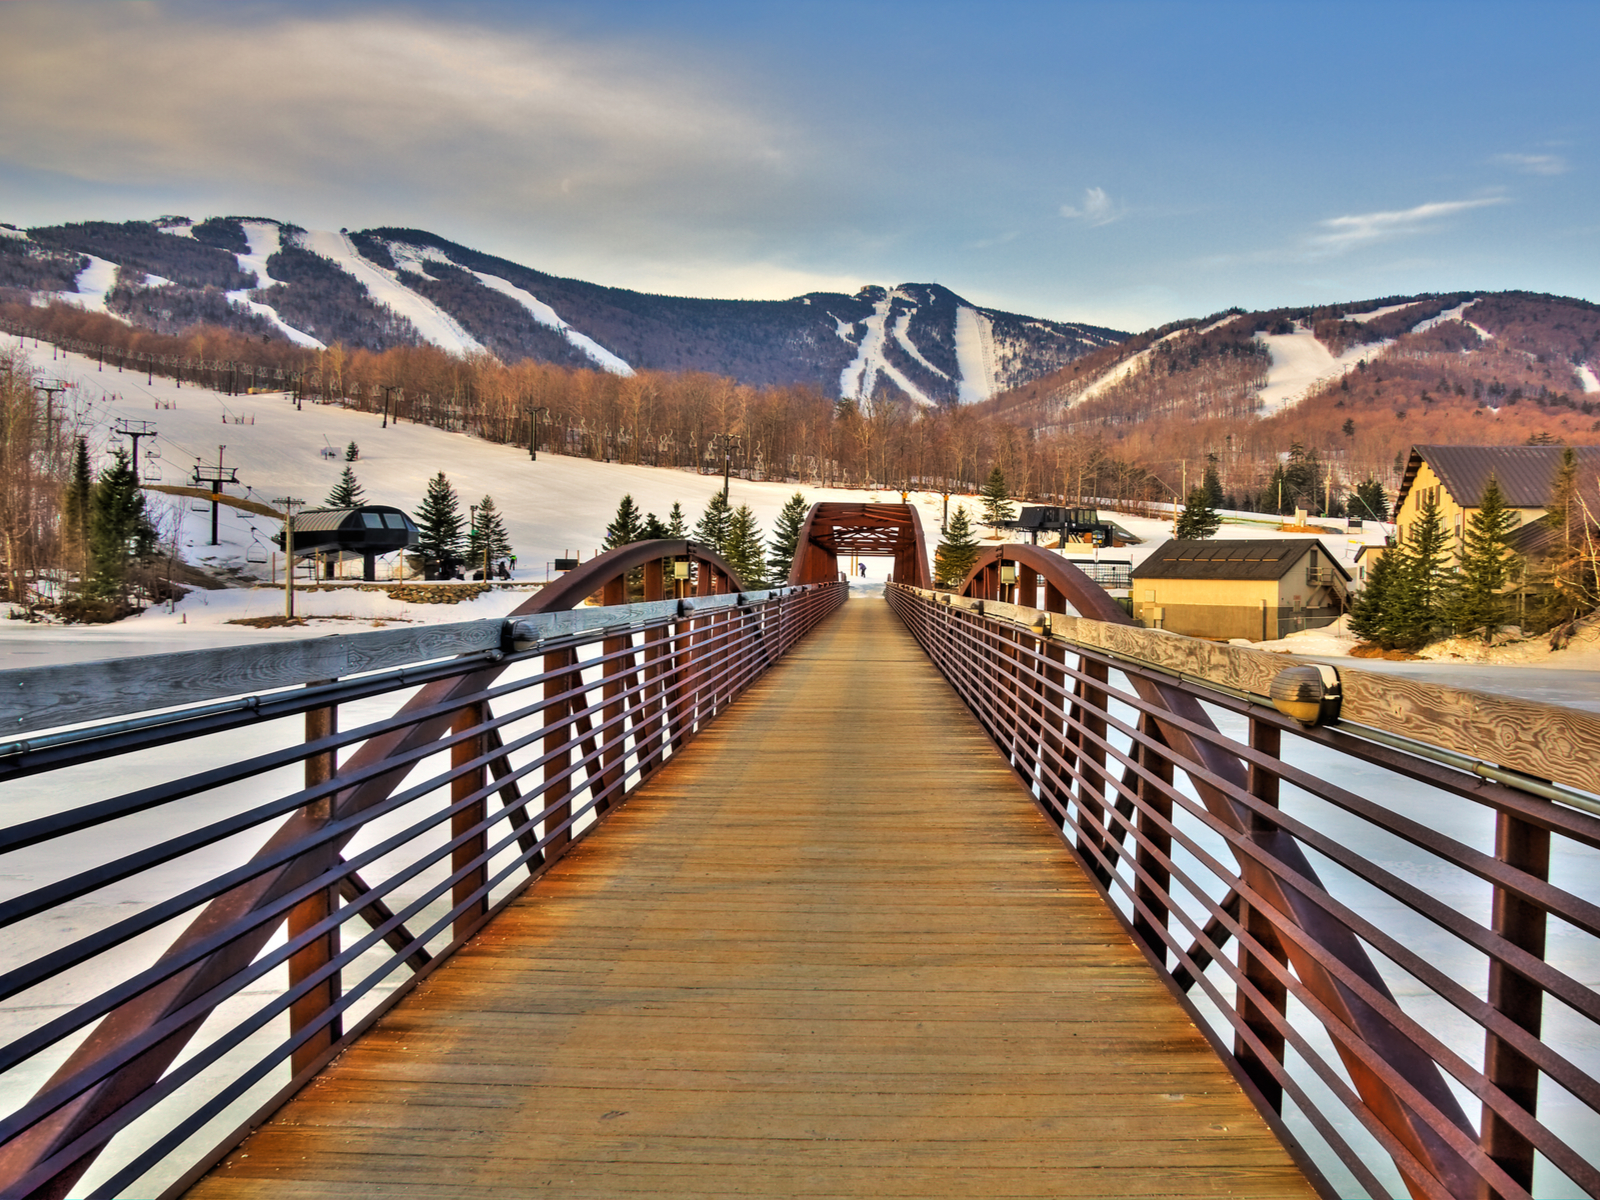 Bridge over a frozen river at the Killington Ski Resort, one of the best places to visit in Vermont